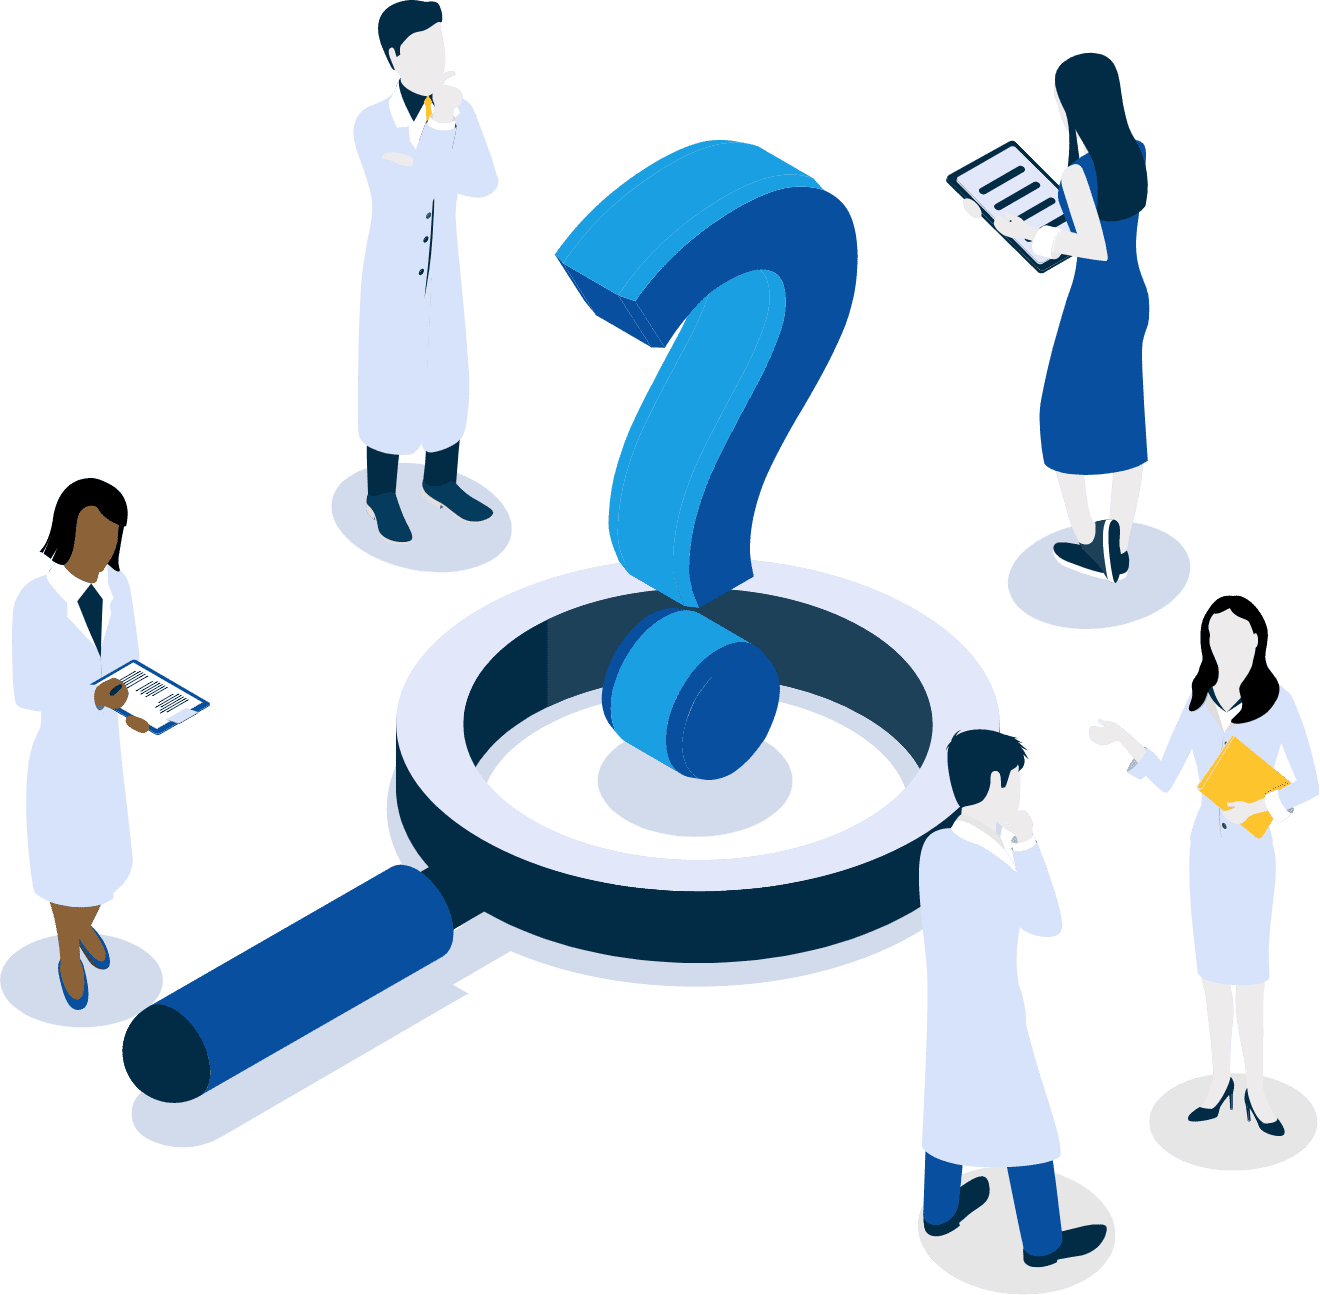 Illustration showing a team of specialists around a giant question mark representing QSFs